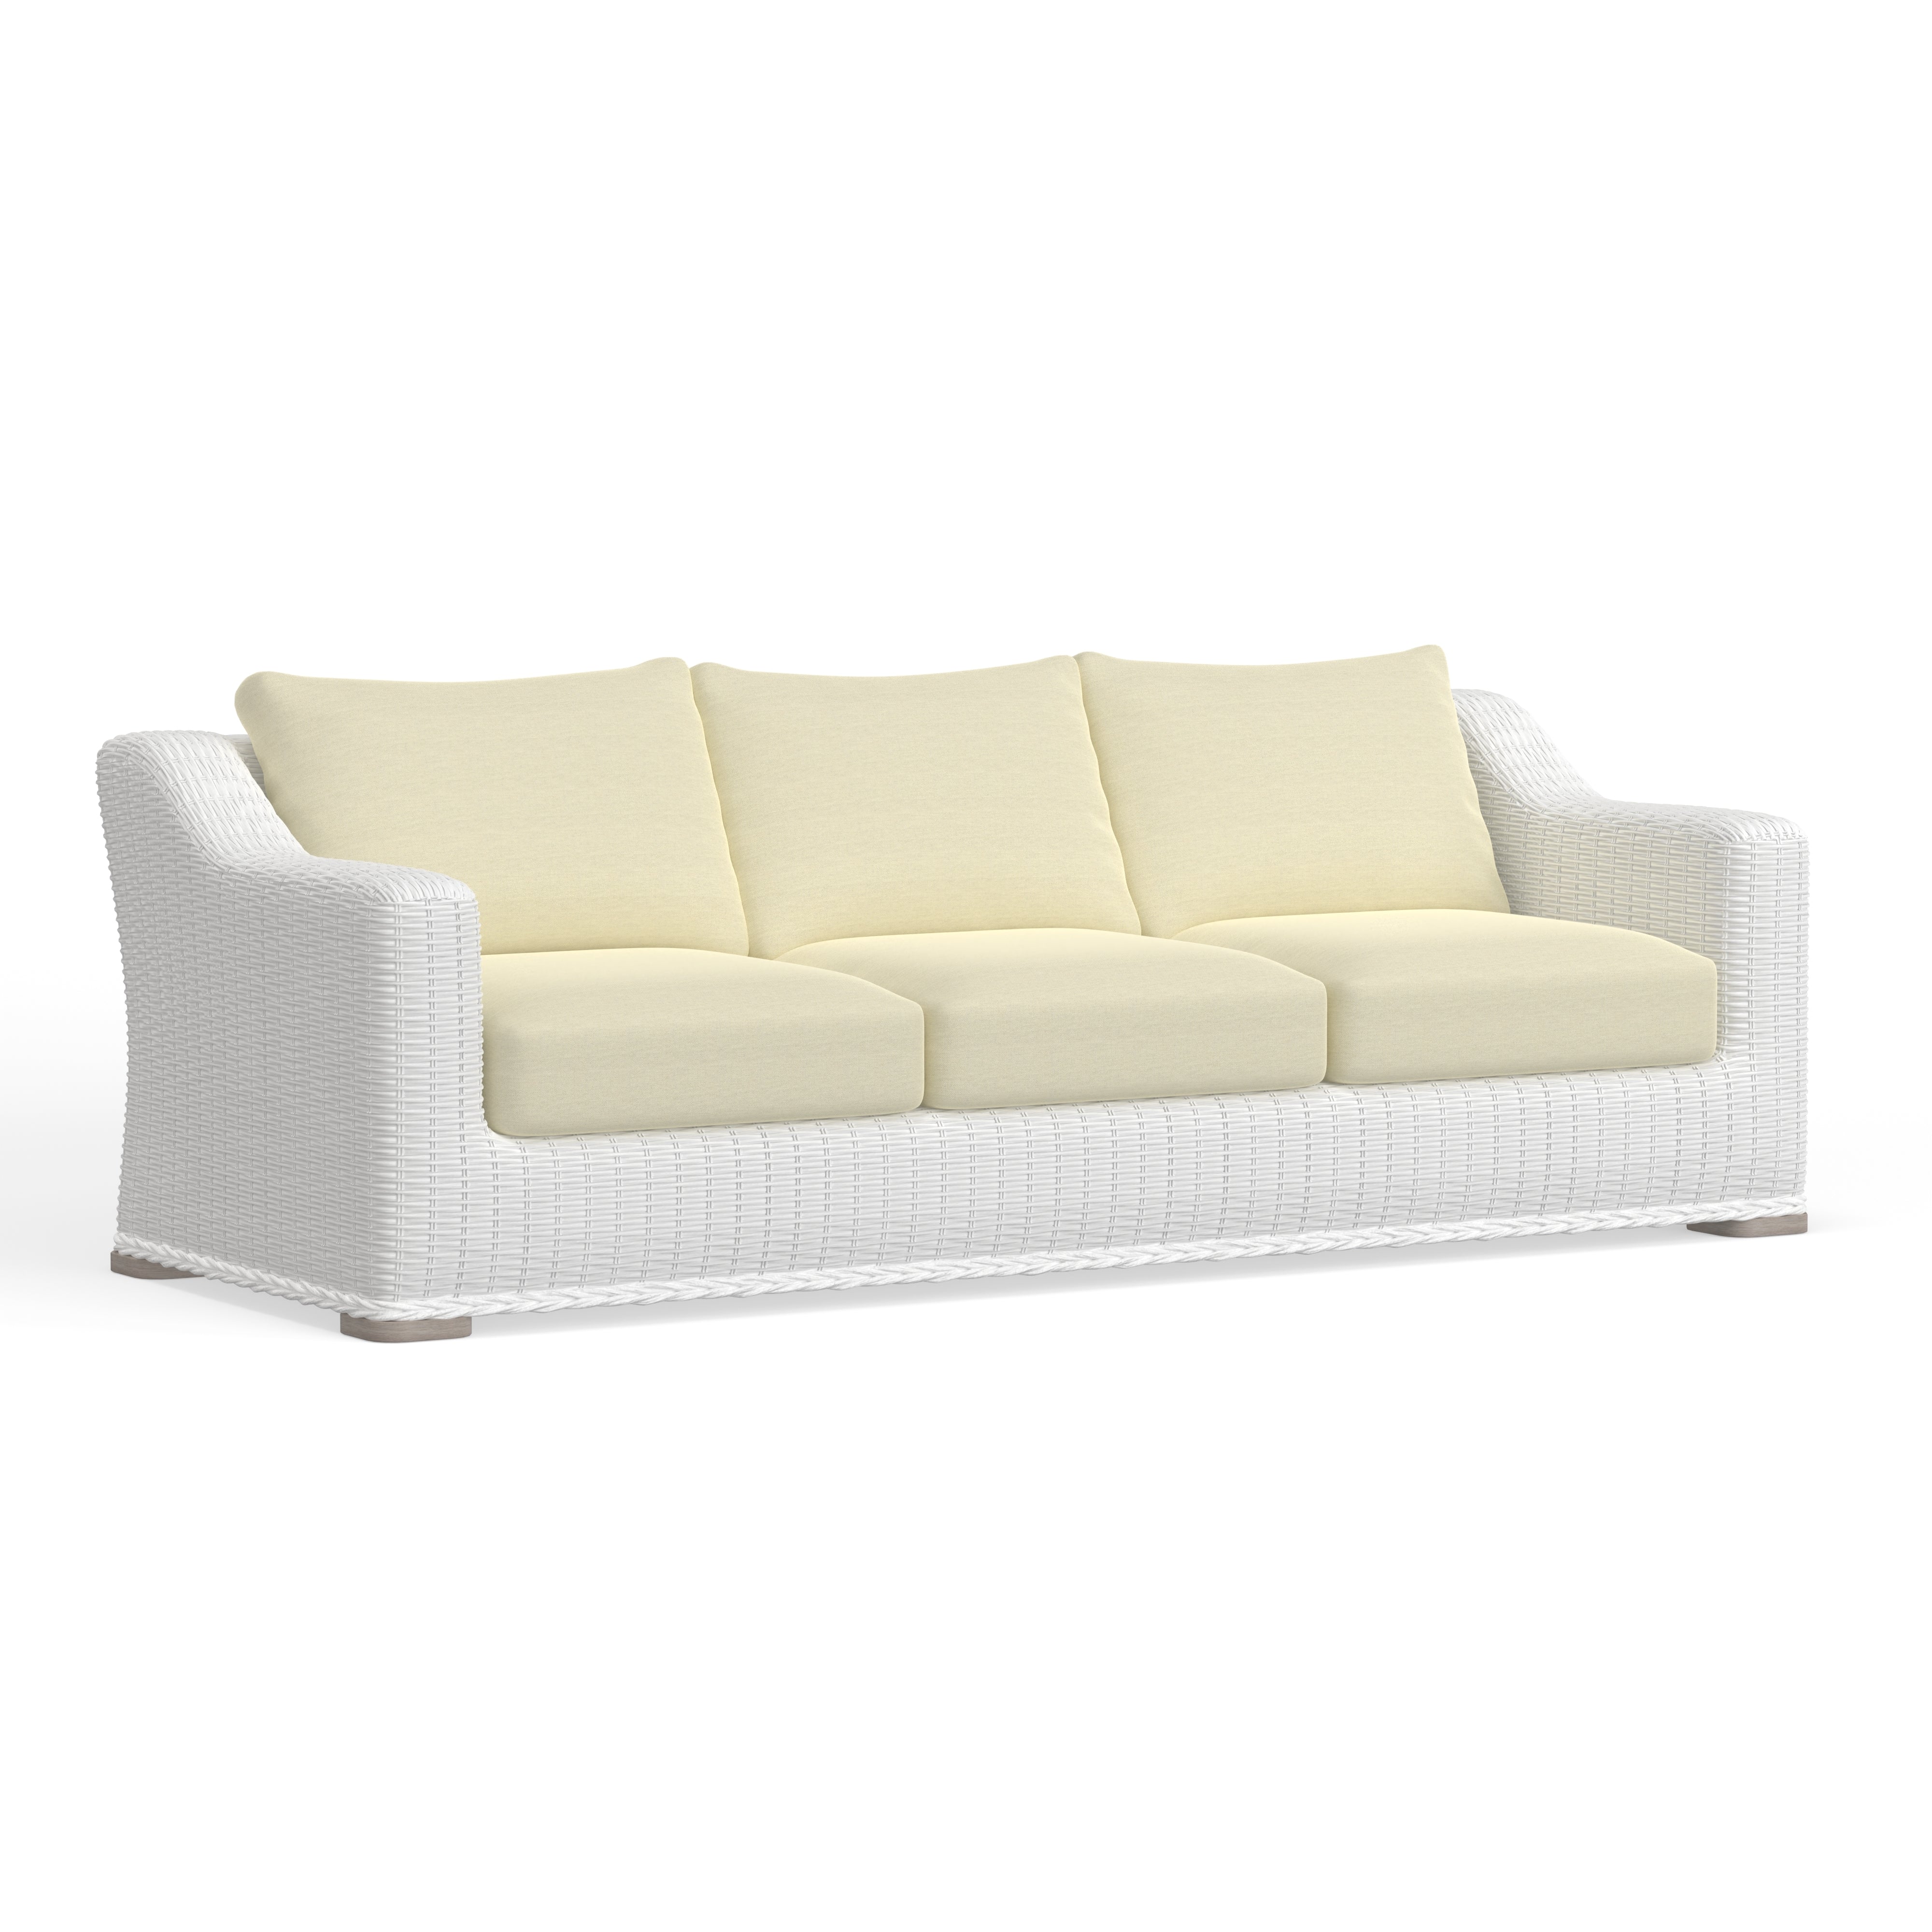 Best Wicker Sofa Available Now